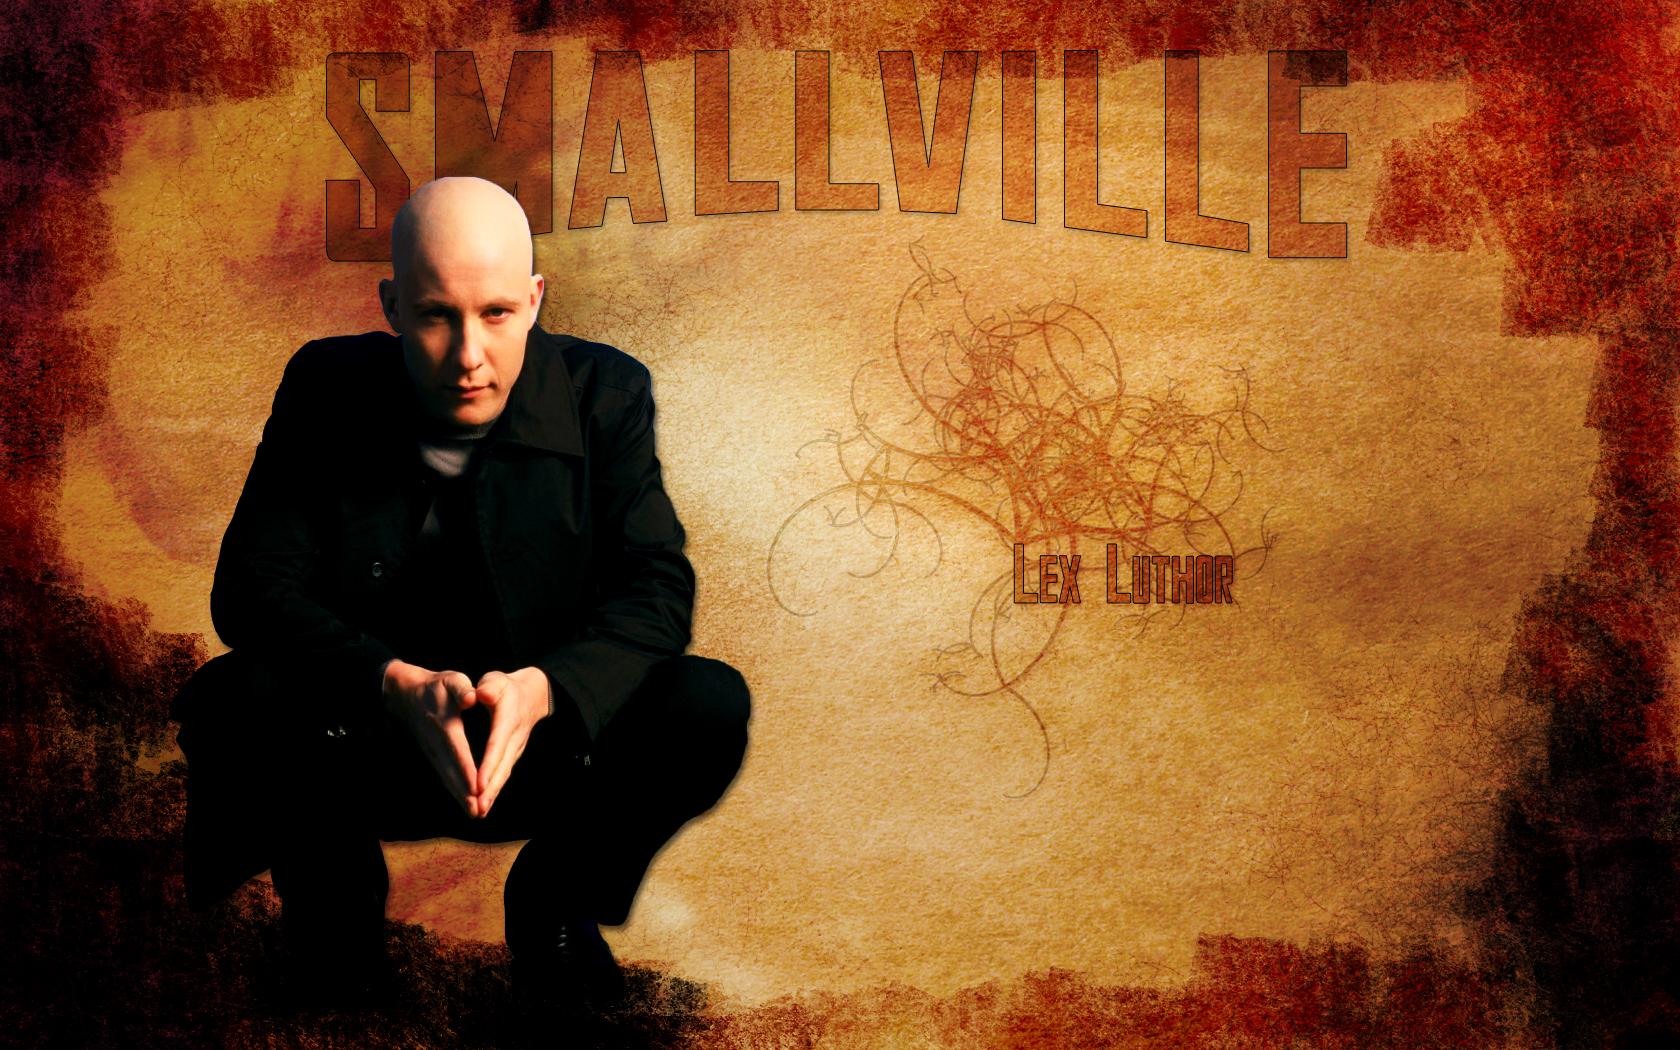 Smallville Lex Luthor By Sexyladymaul Fan Art Wallpaper Movies Tv